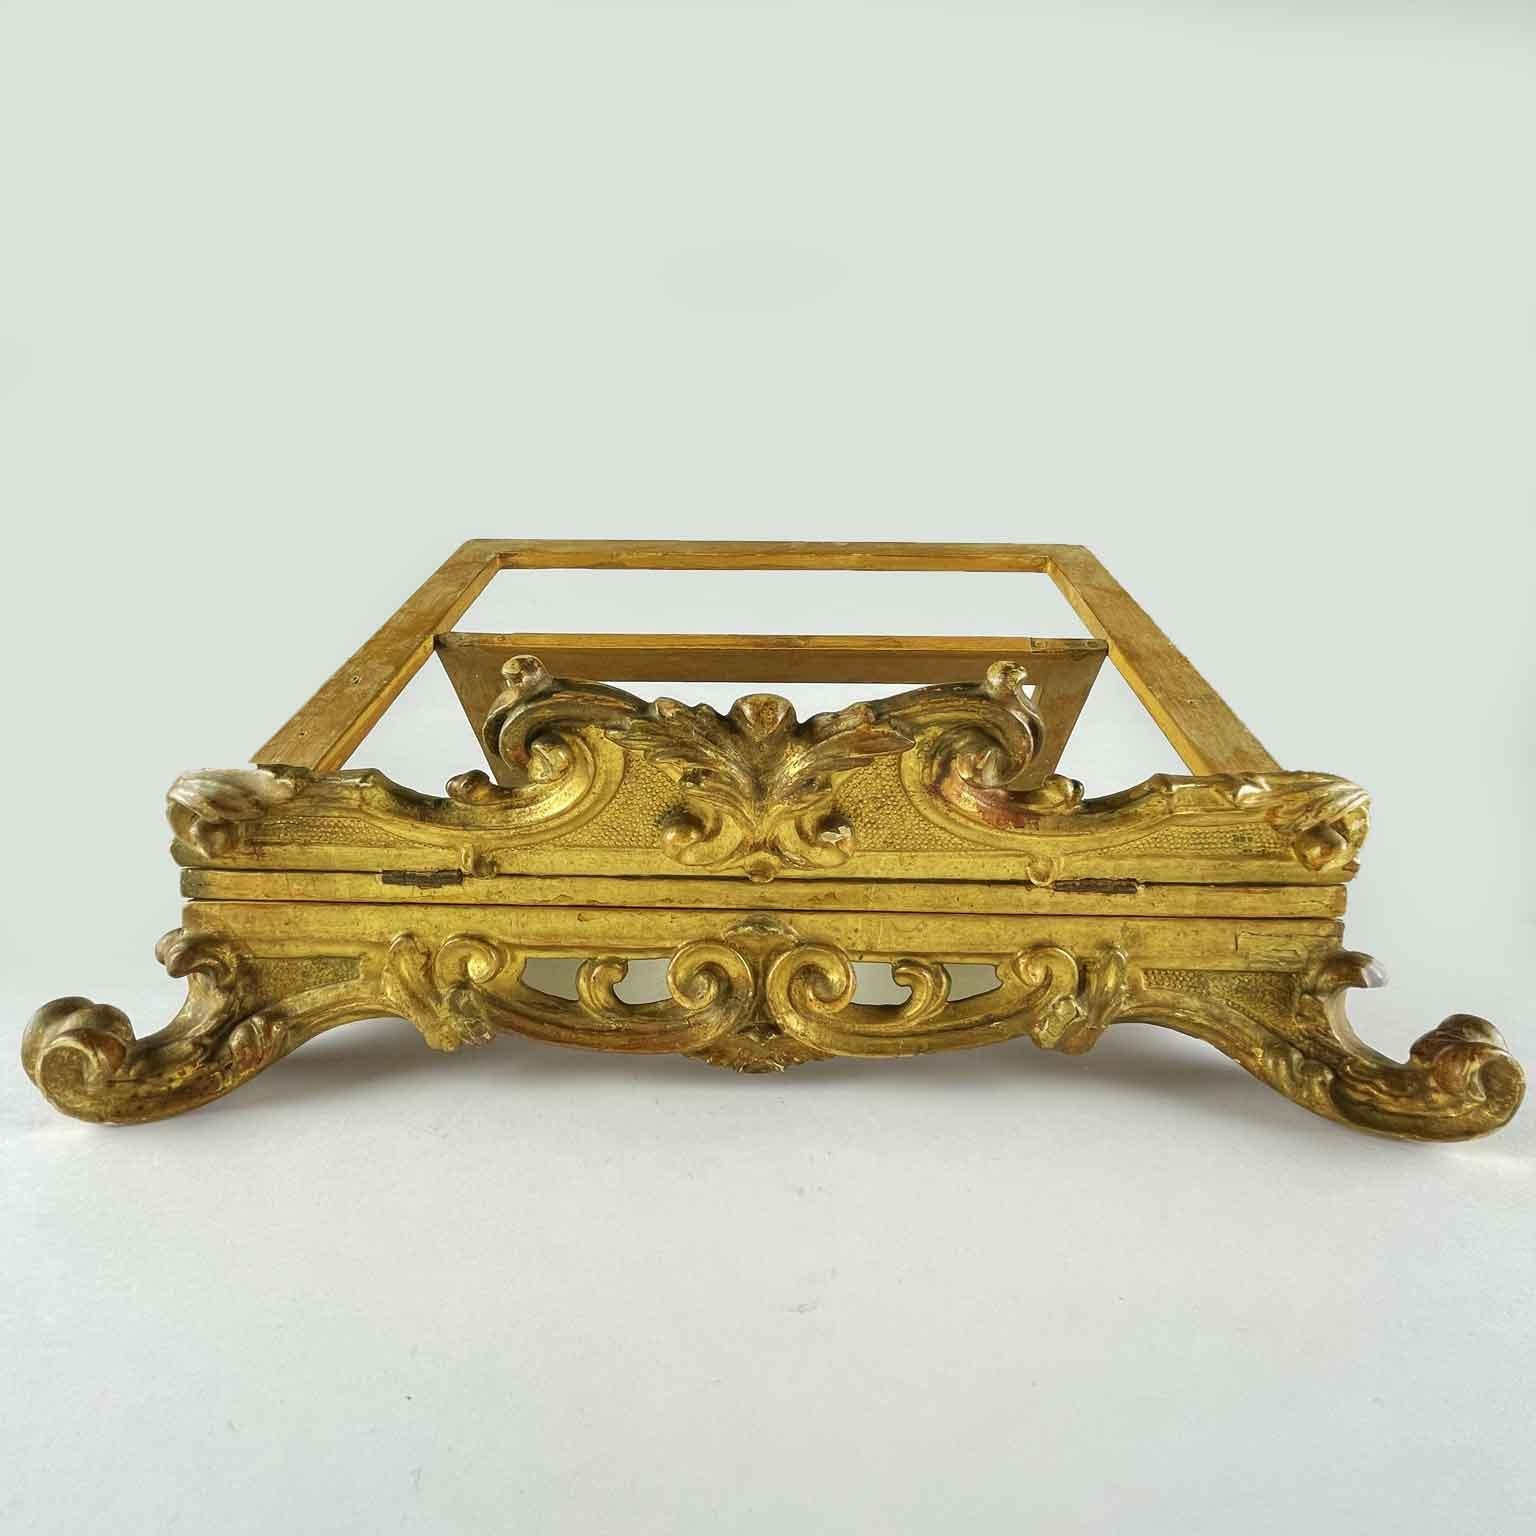 From Italy, a late 18th century carved and gilded table lectern, an antique rectangular spruce wood bookstand or music stand on four curling feet. This antique reading bookstand is adjustable and the turning support allowing the lectern to be placed